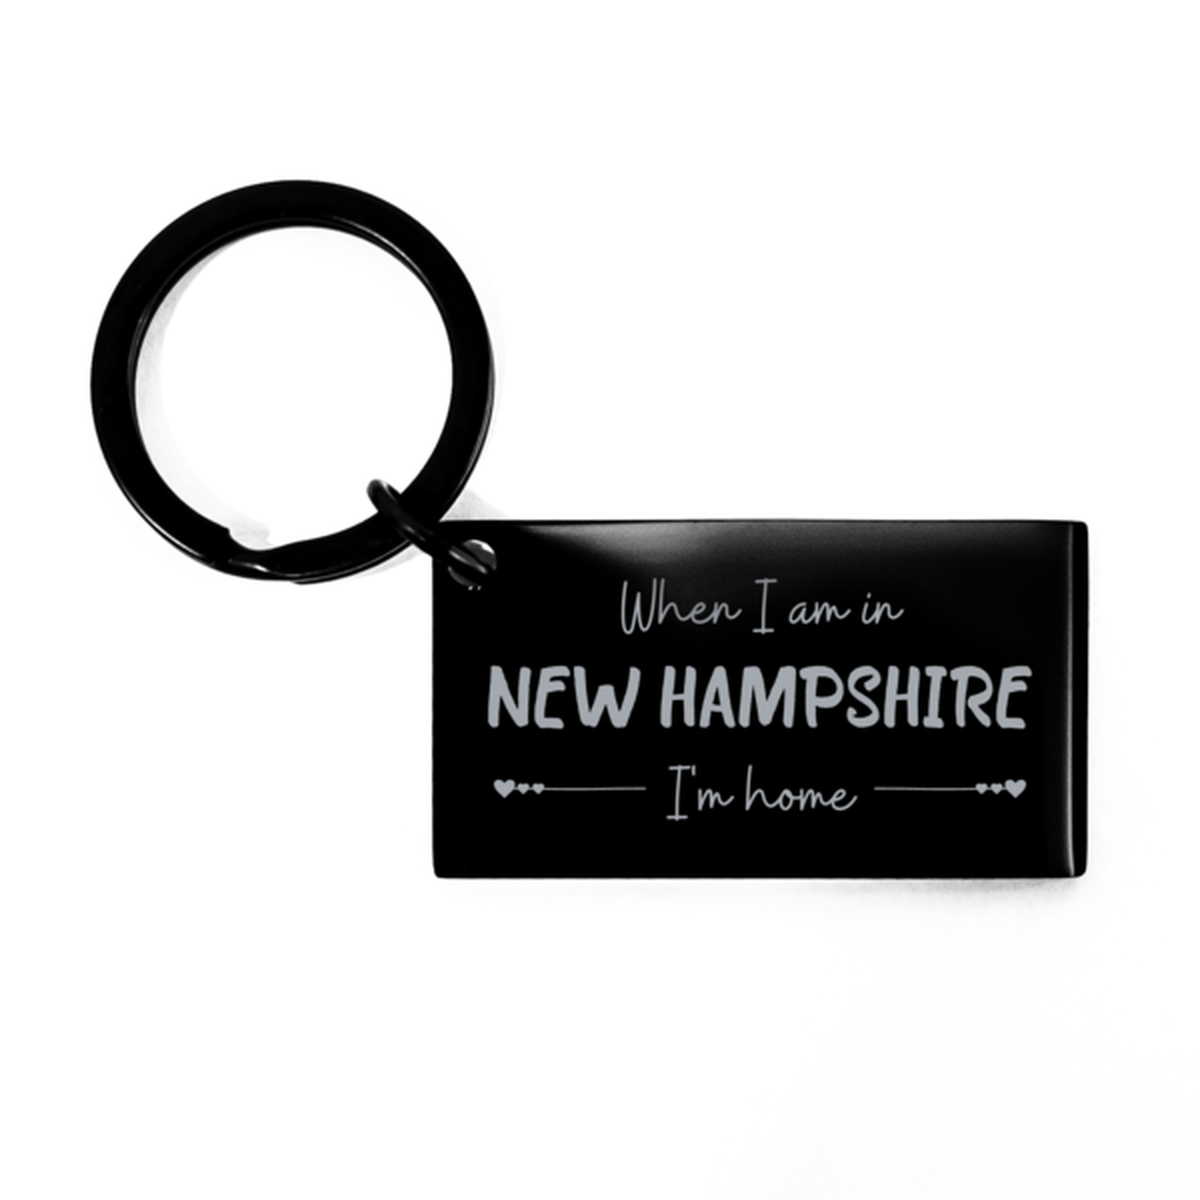 When I am in New Hampshire I'm home Keychain, Cheap Gifts For New Hampshire, State New Hampshire Birthday Gifts for Friends Coworker